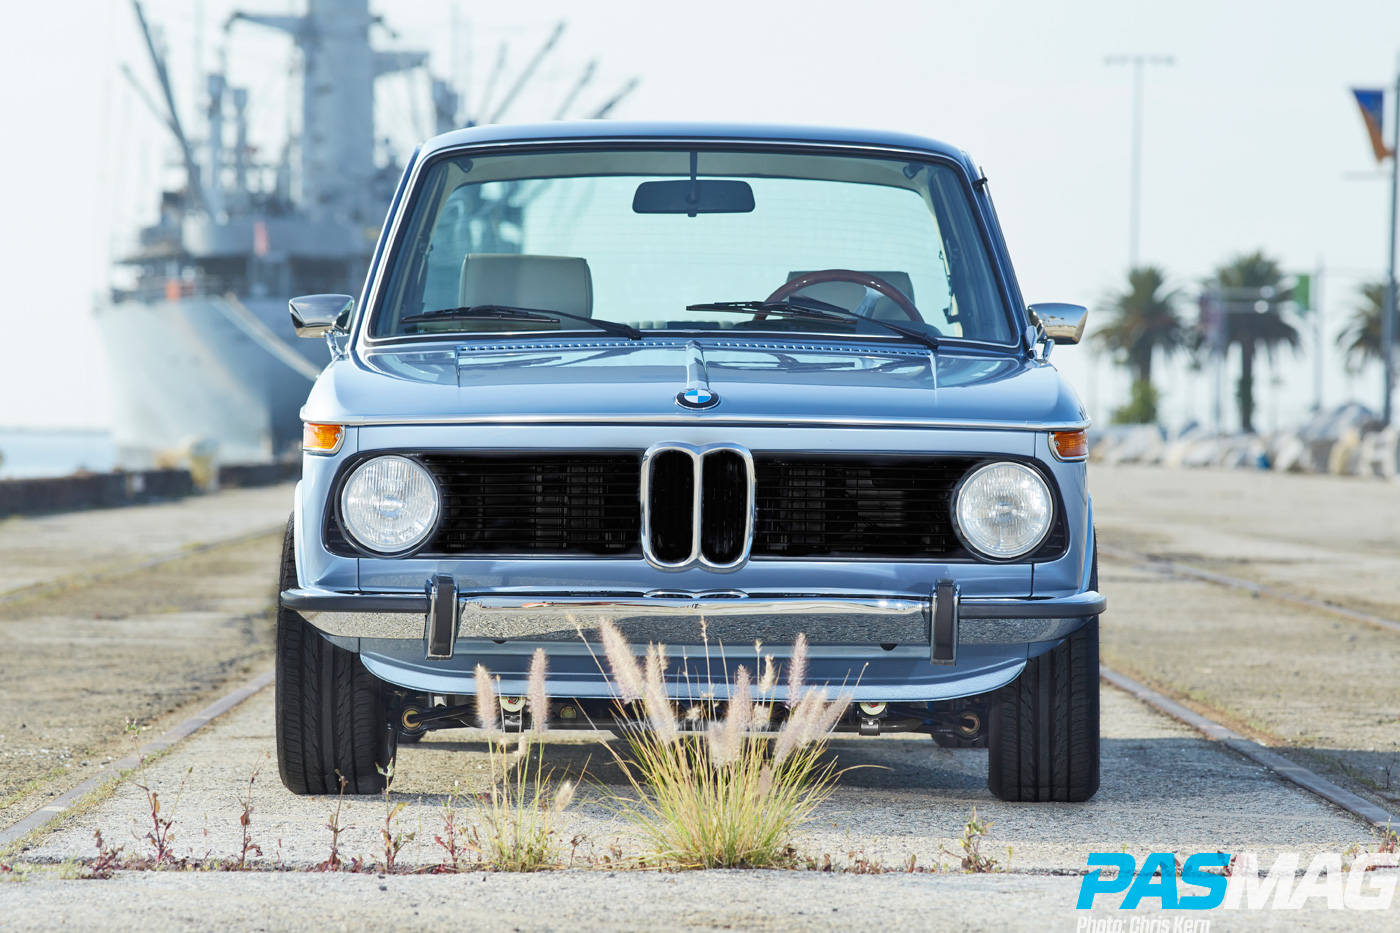 Aught Two: Clarion Builds' Iconic Restoration - 1974 BMW 2002 (Photo by Chris Kern)